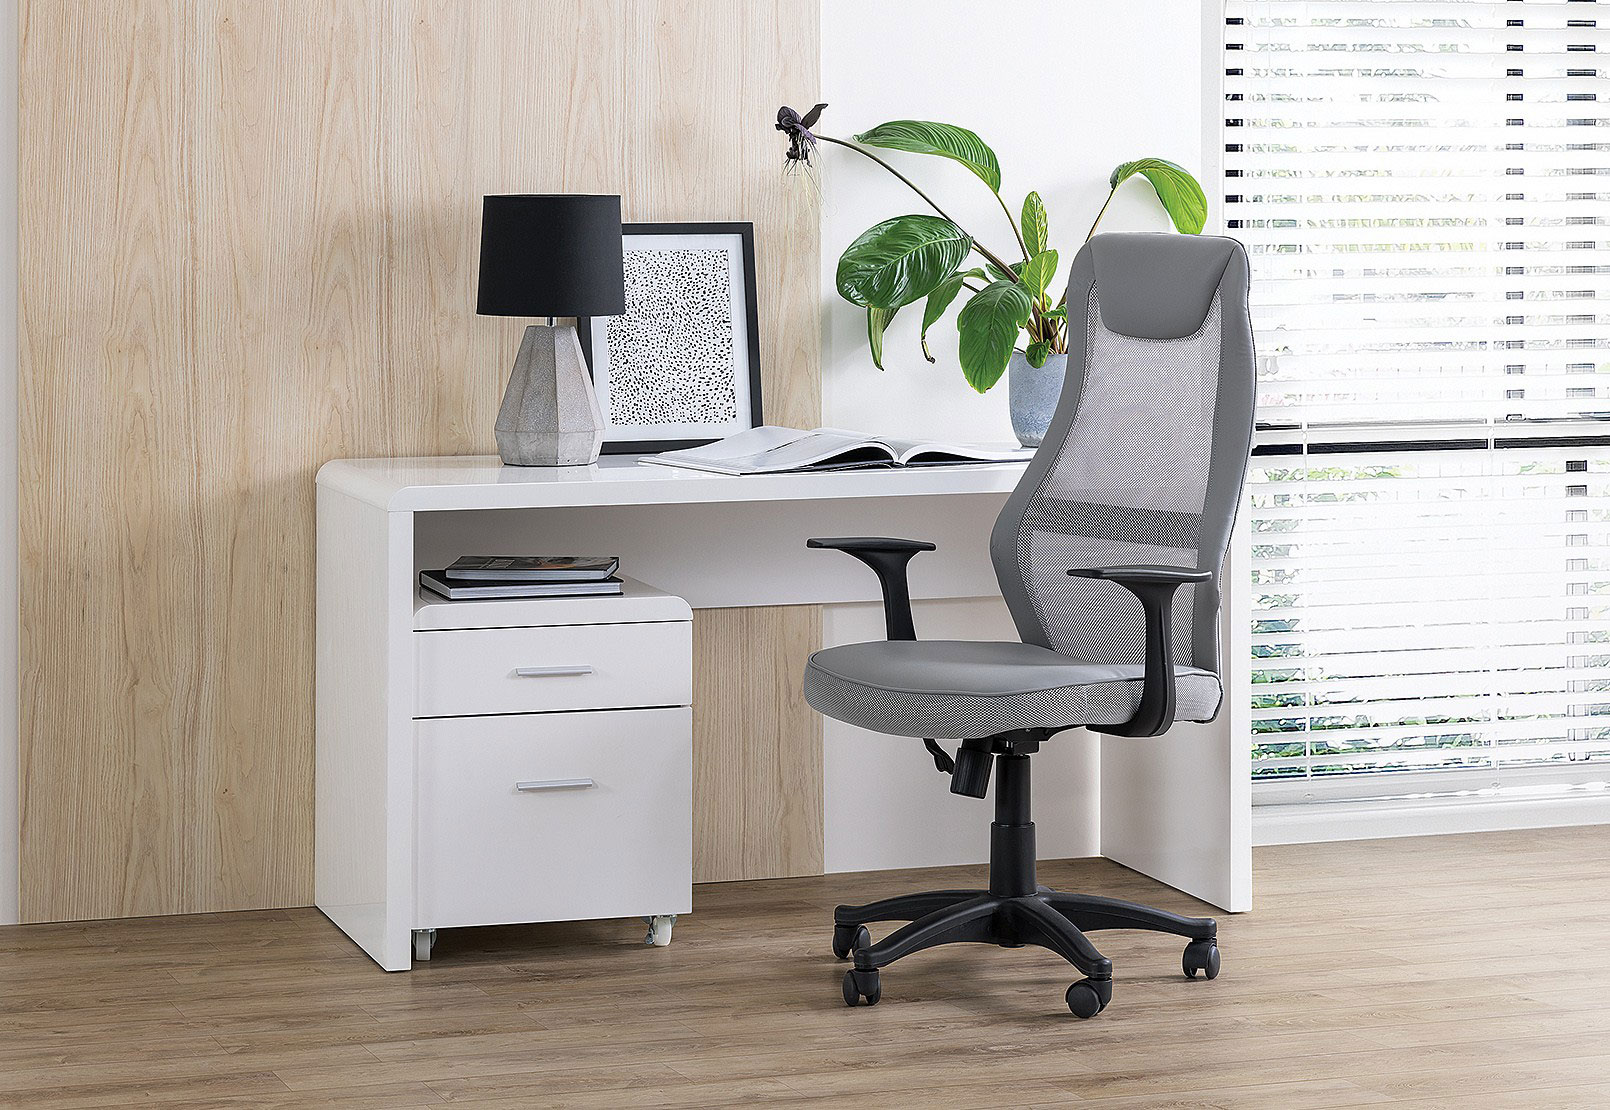 Office chair What is the standard table height (table types and chair heights)?